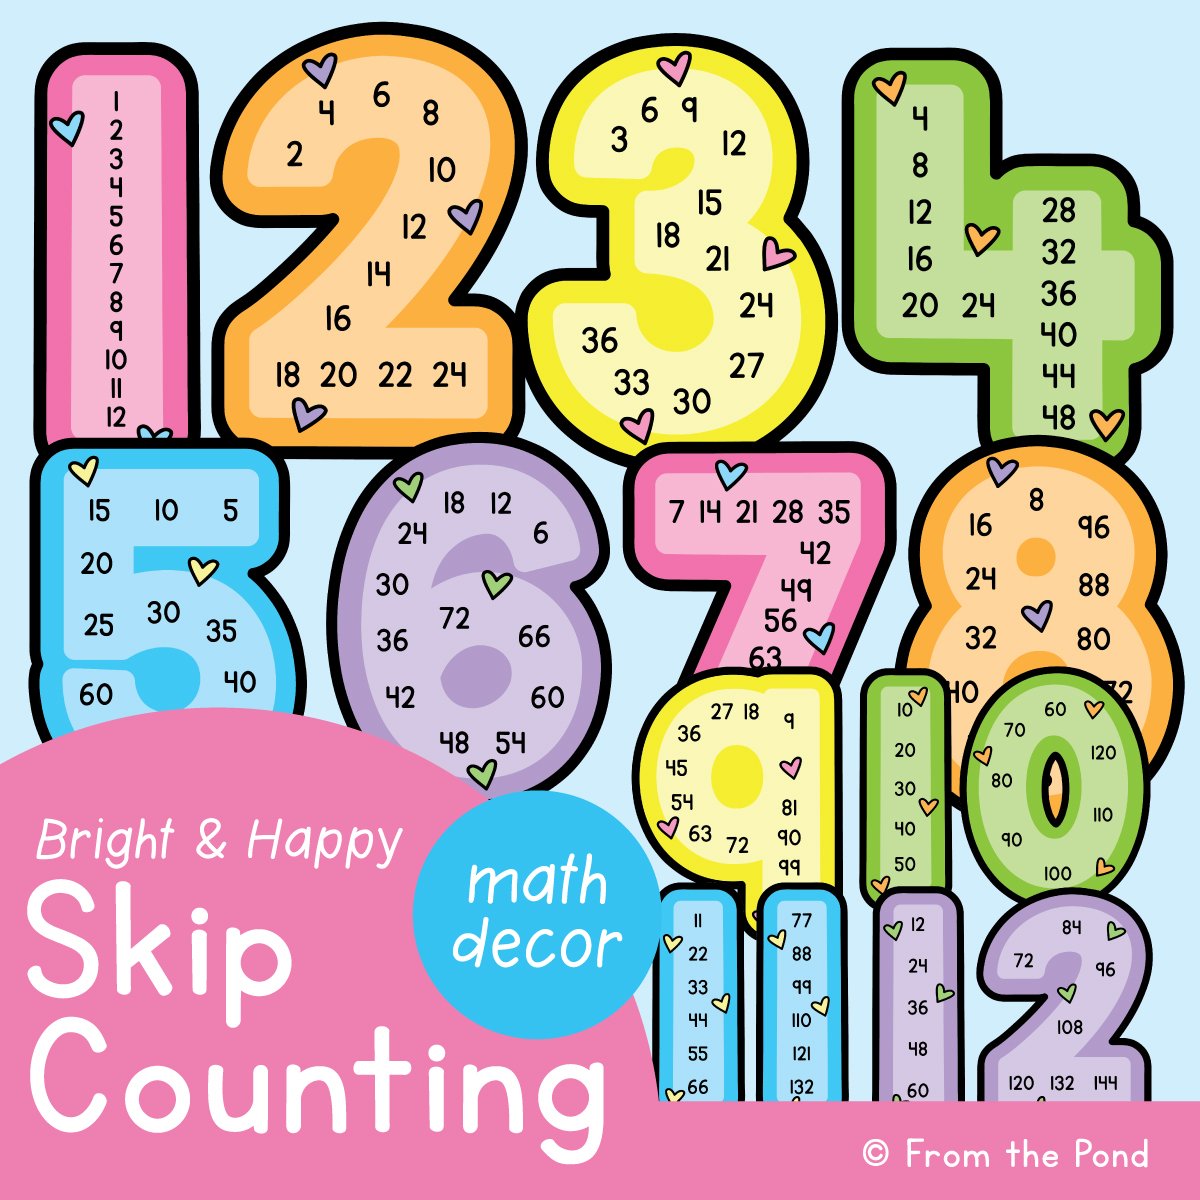 bright-happy-skip-counting-numbers.jpg